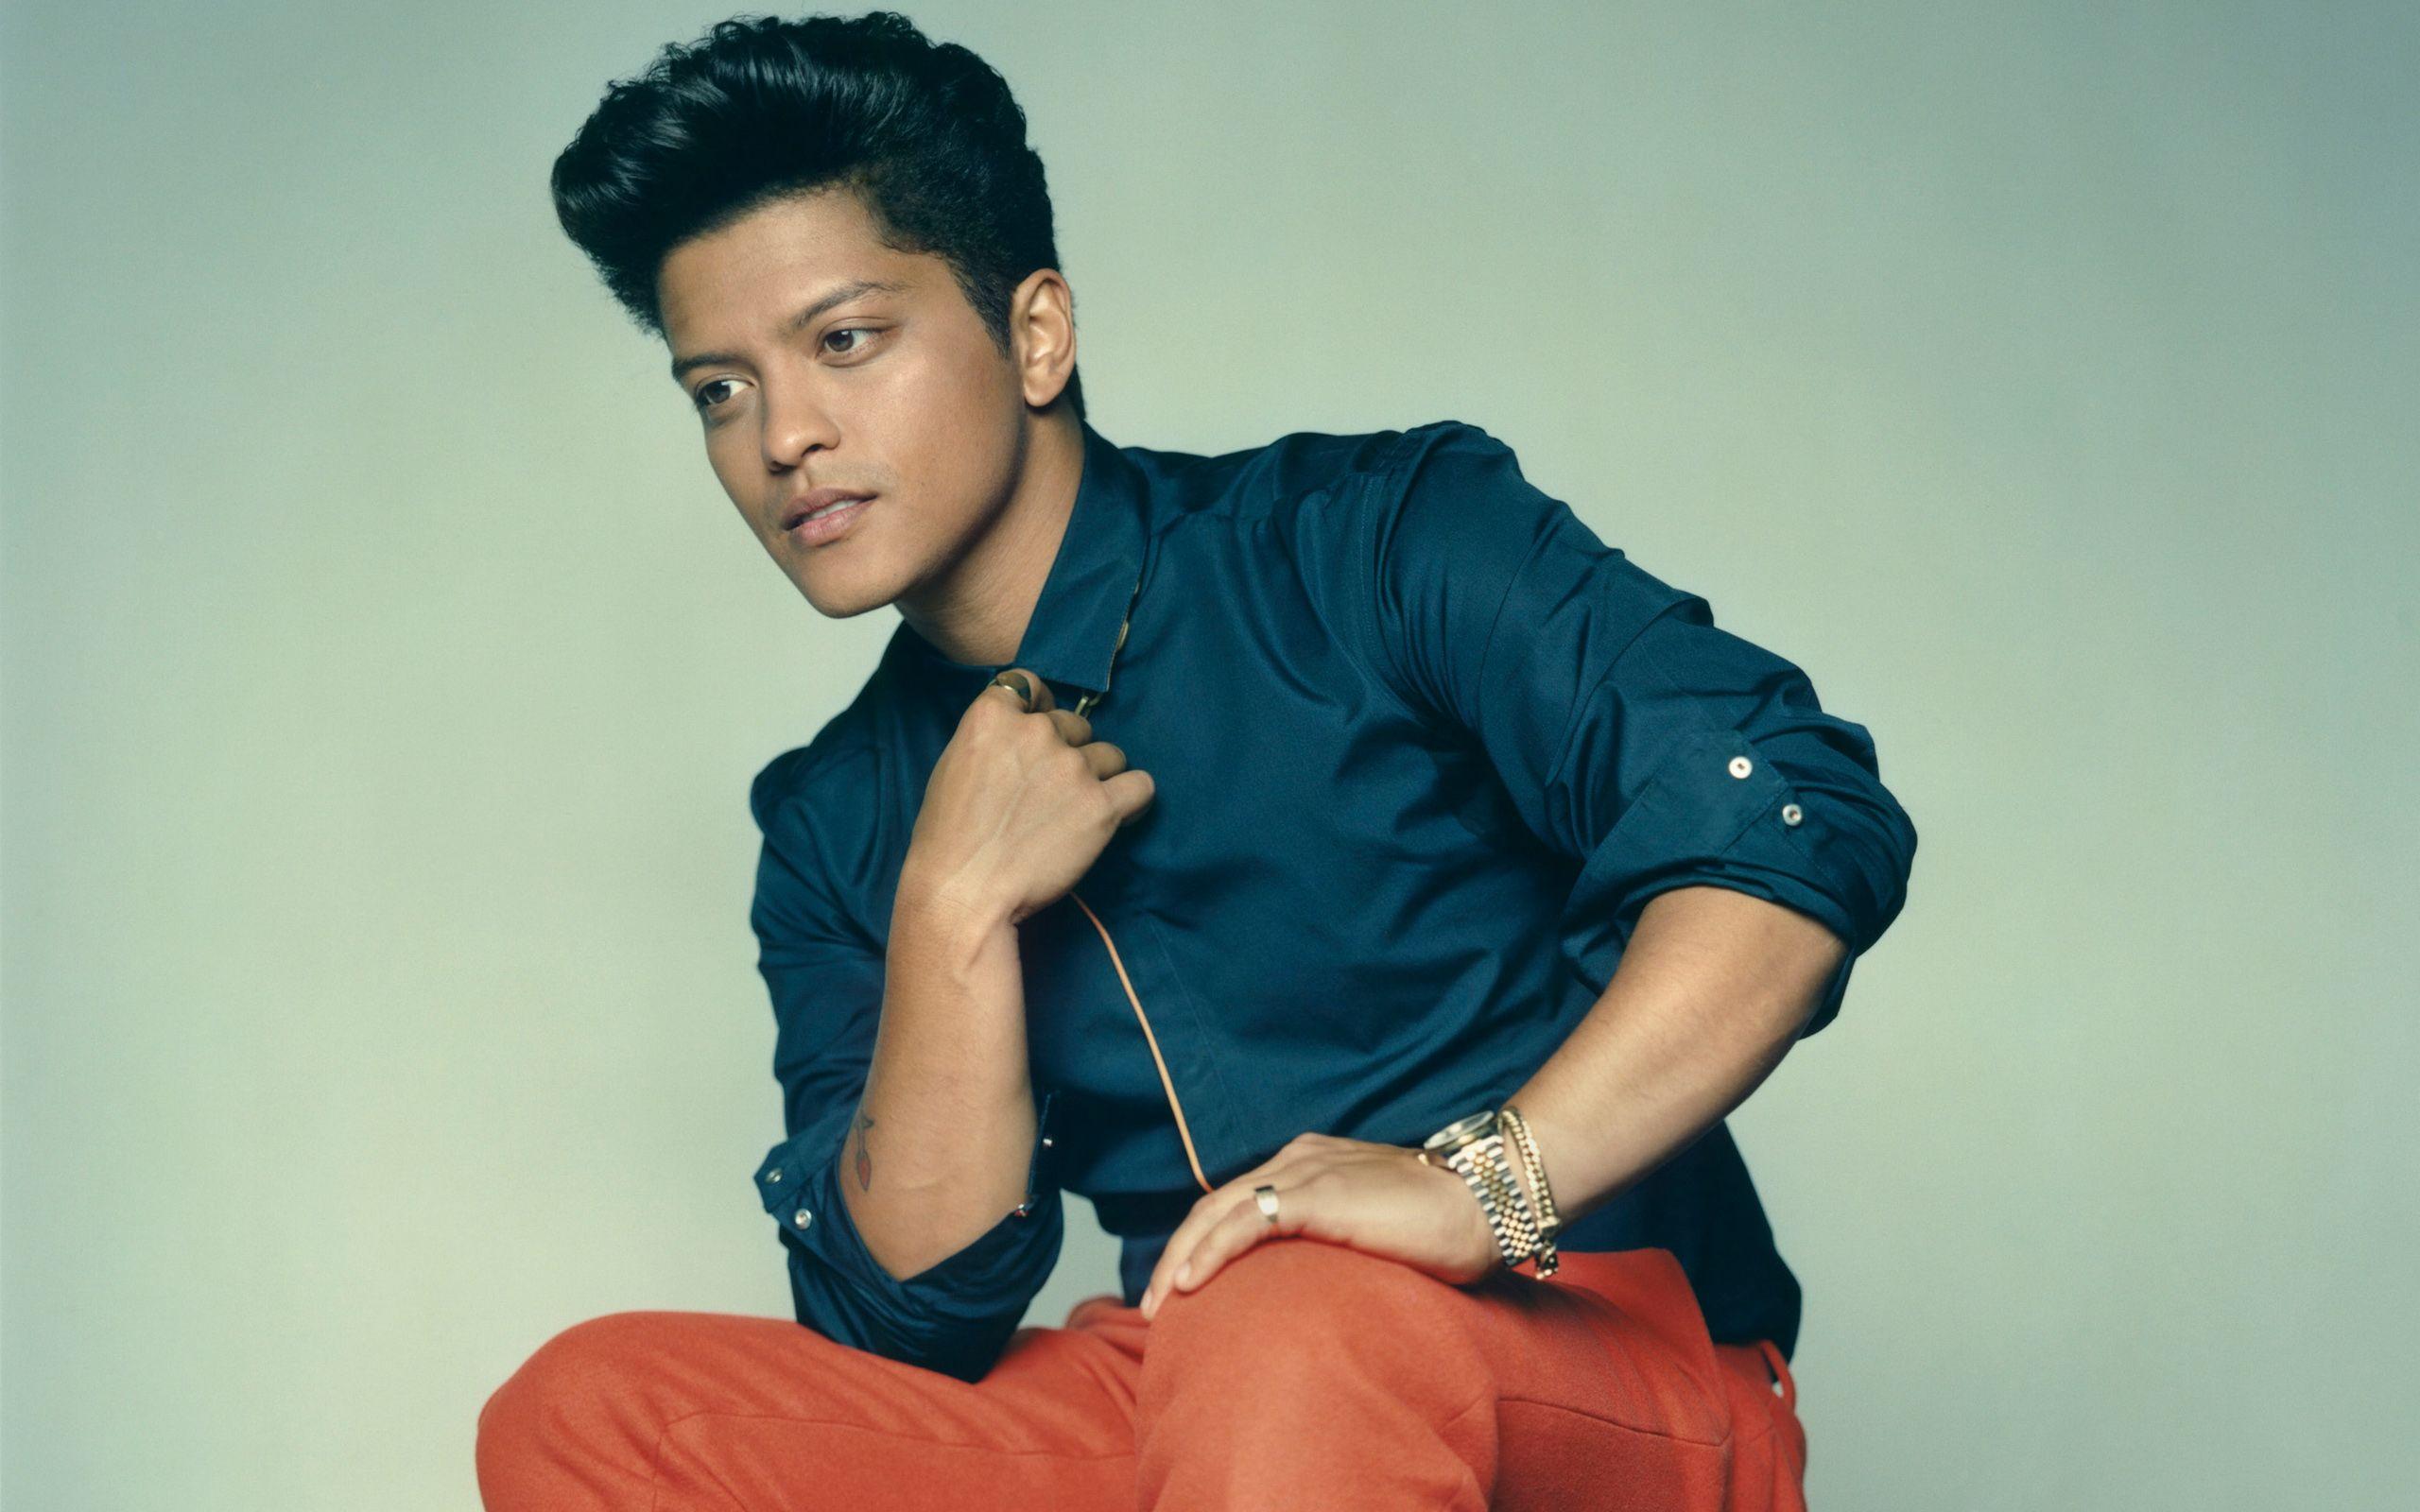 Awesome Bruno Mars HD Wallpaper Free Download